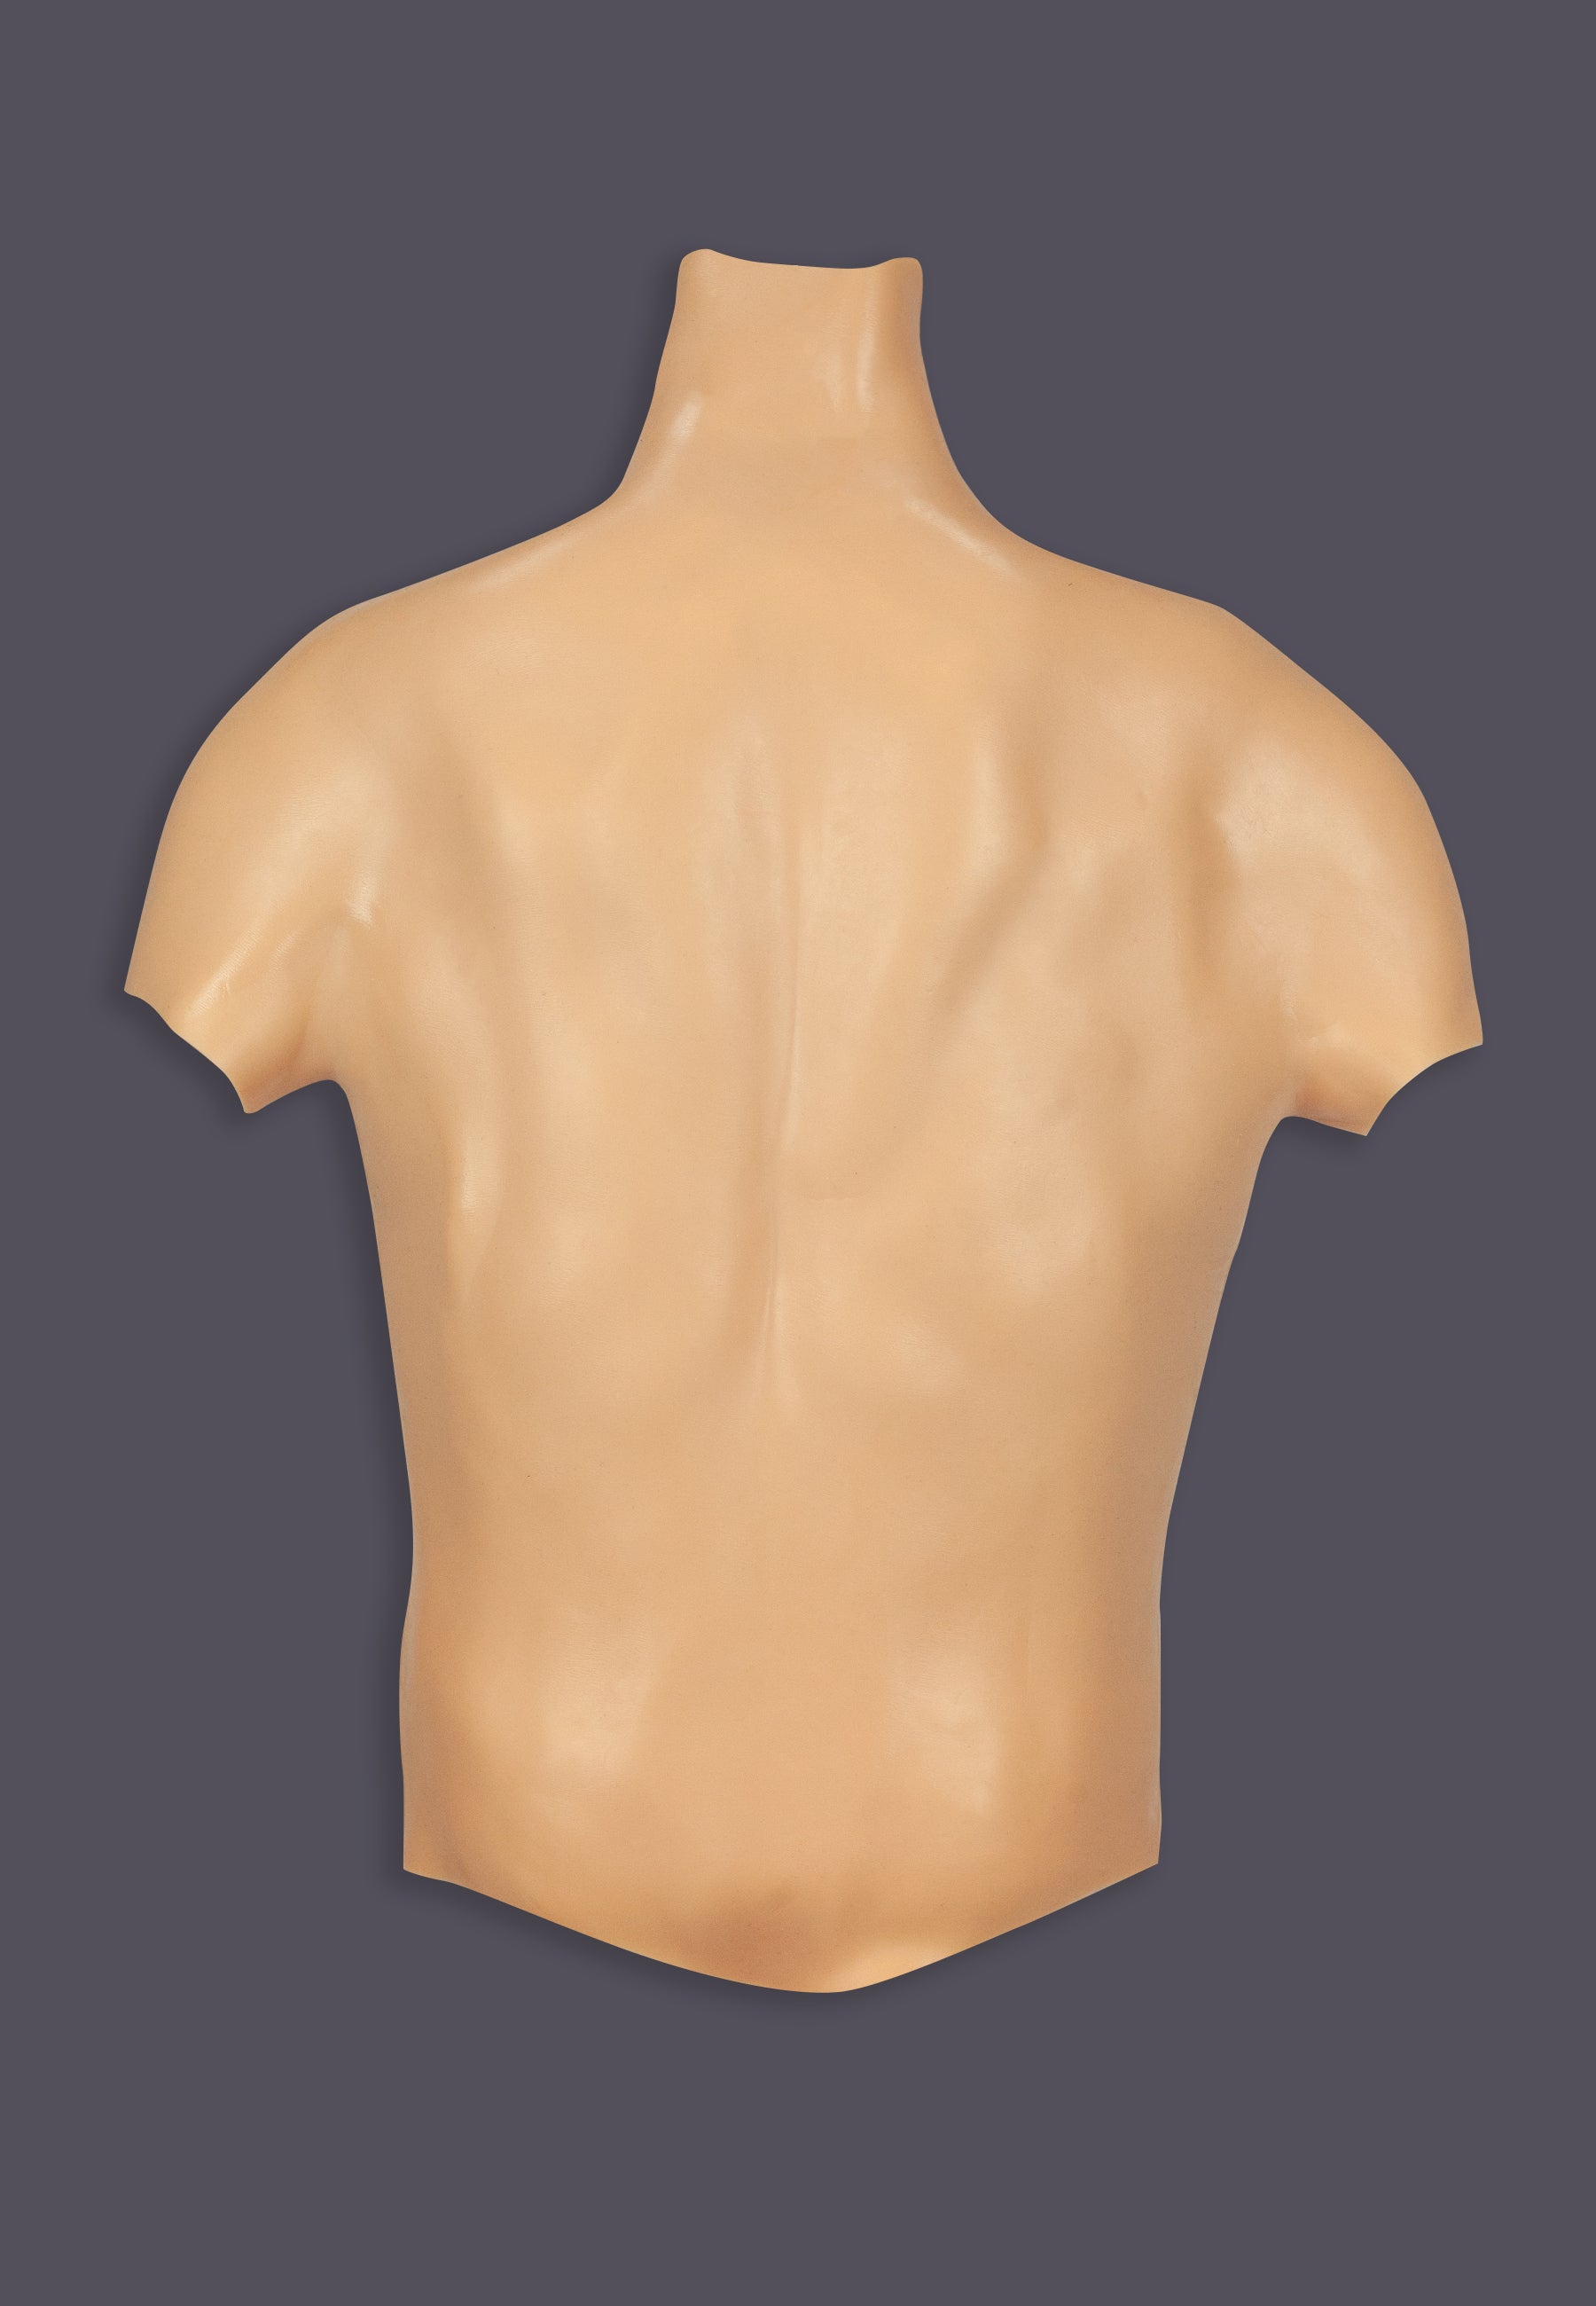 The Male Torso vanilla seen from the back